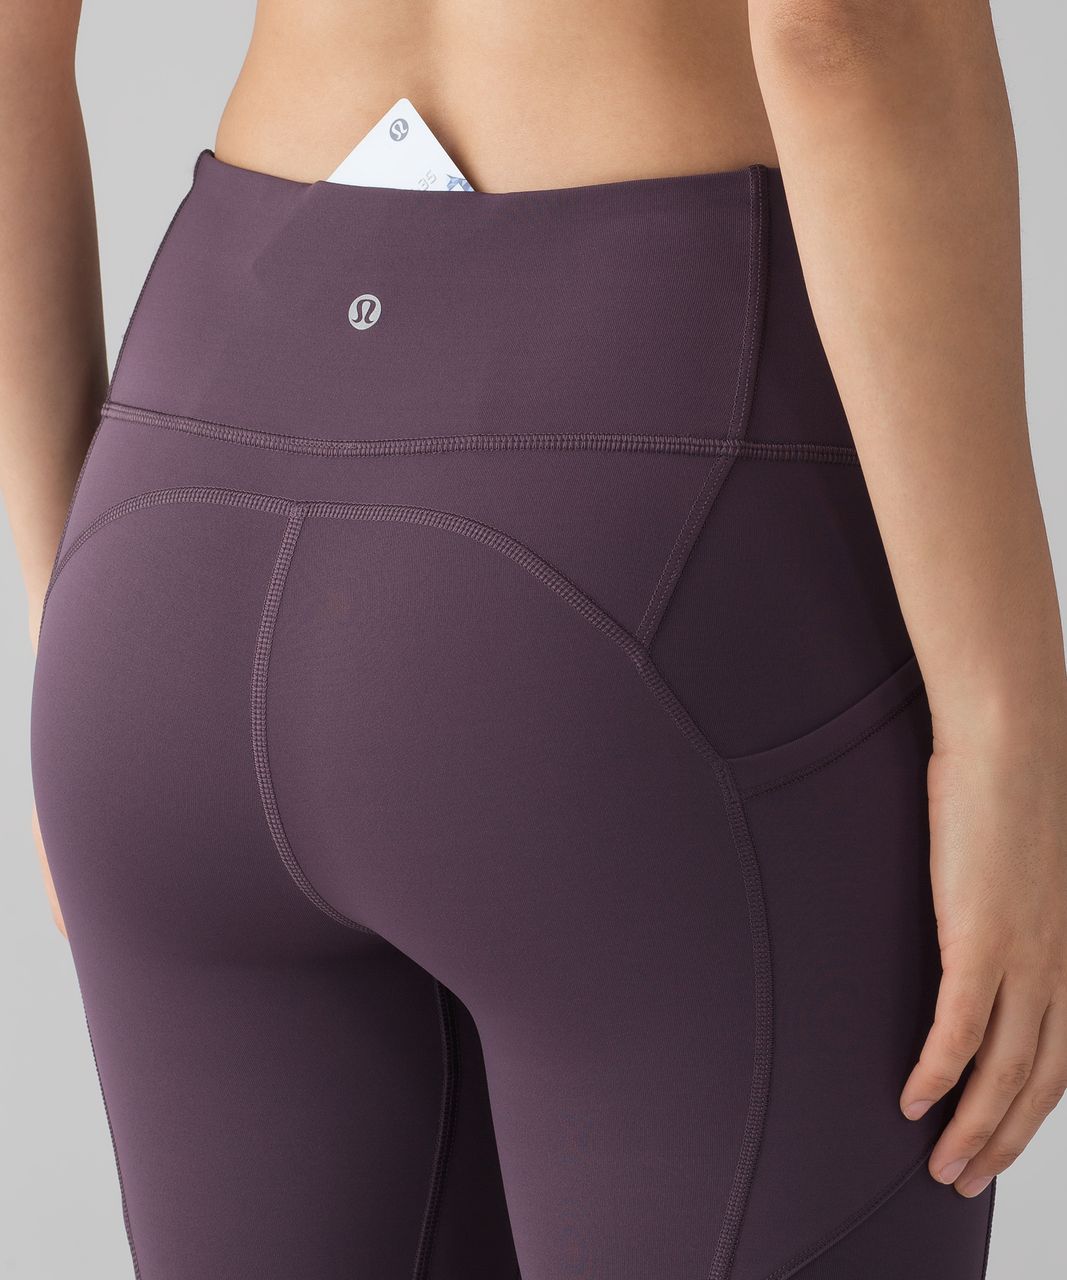 Lululemon All The Right Places Pant II *28" - Black Currant